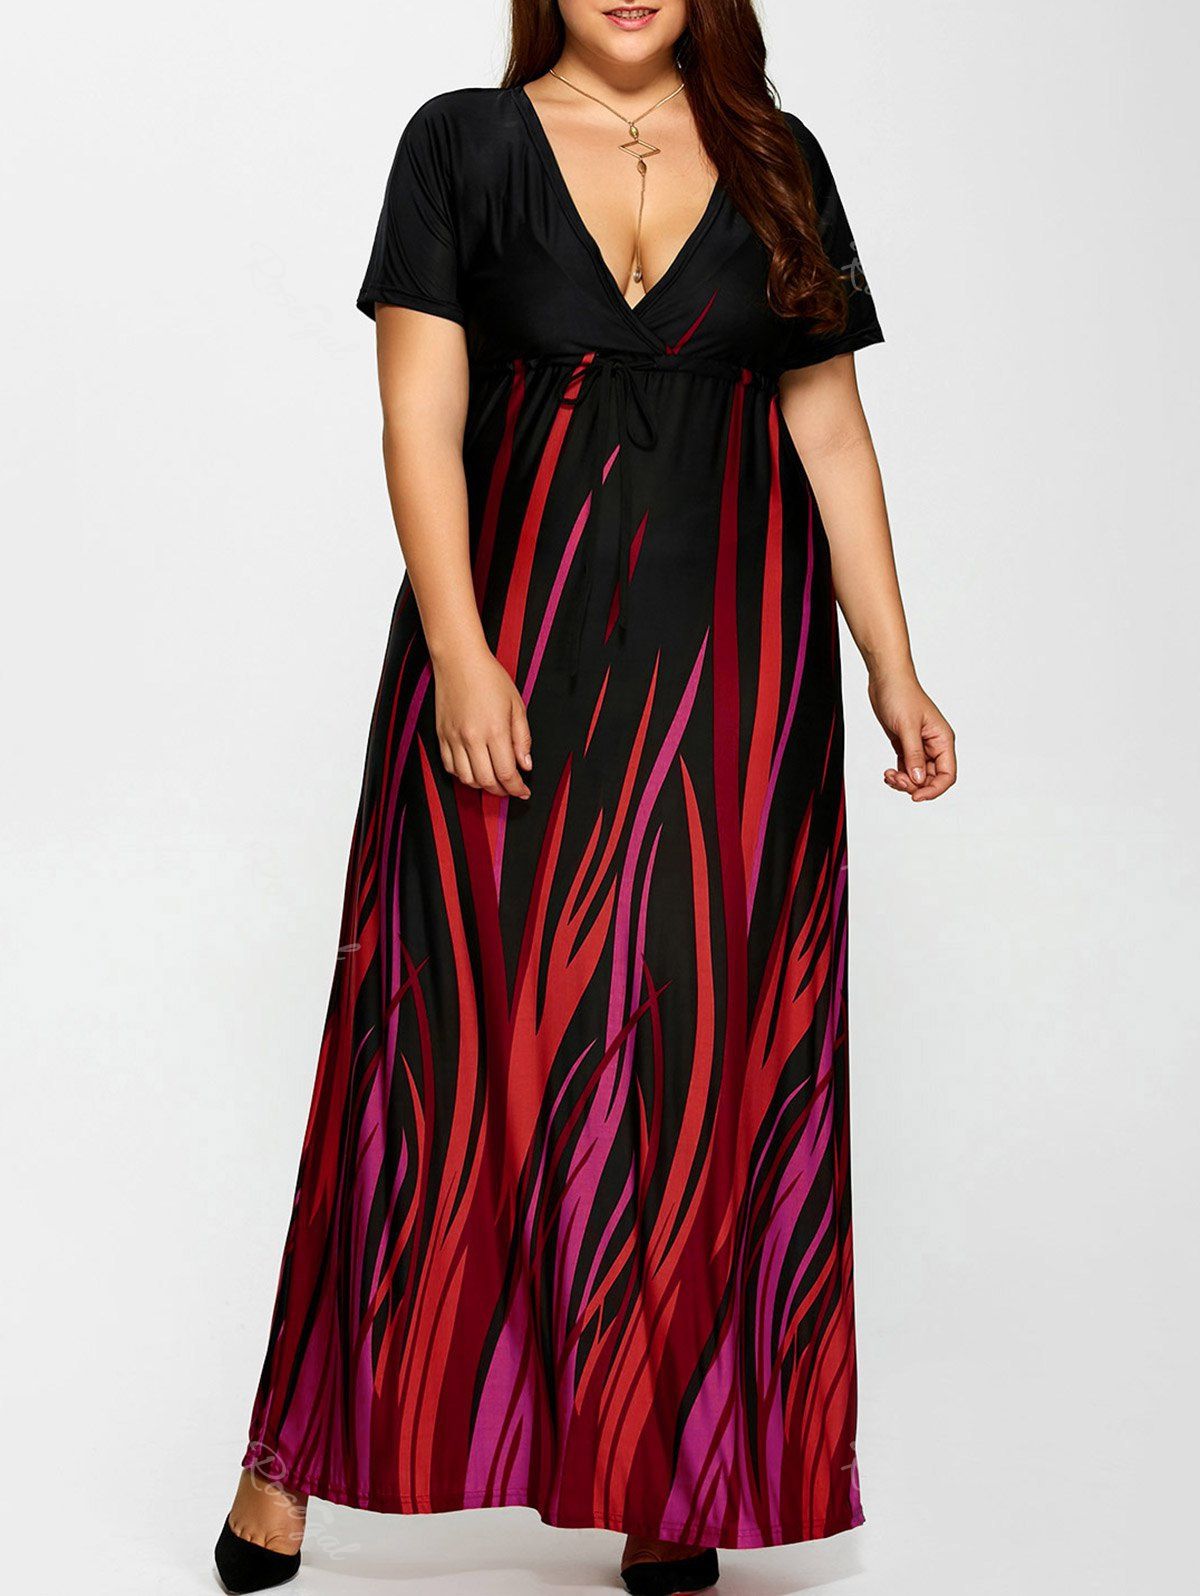 [37% OFF] Plus Size Printed Empire Waist Maxi Formal A Line Party Dress ...